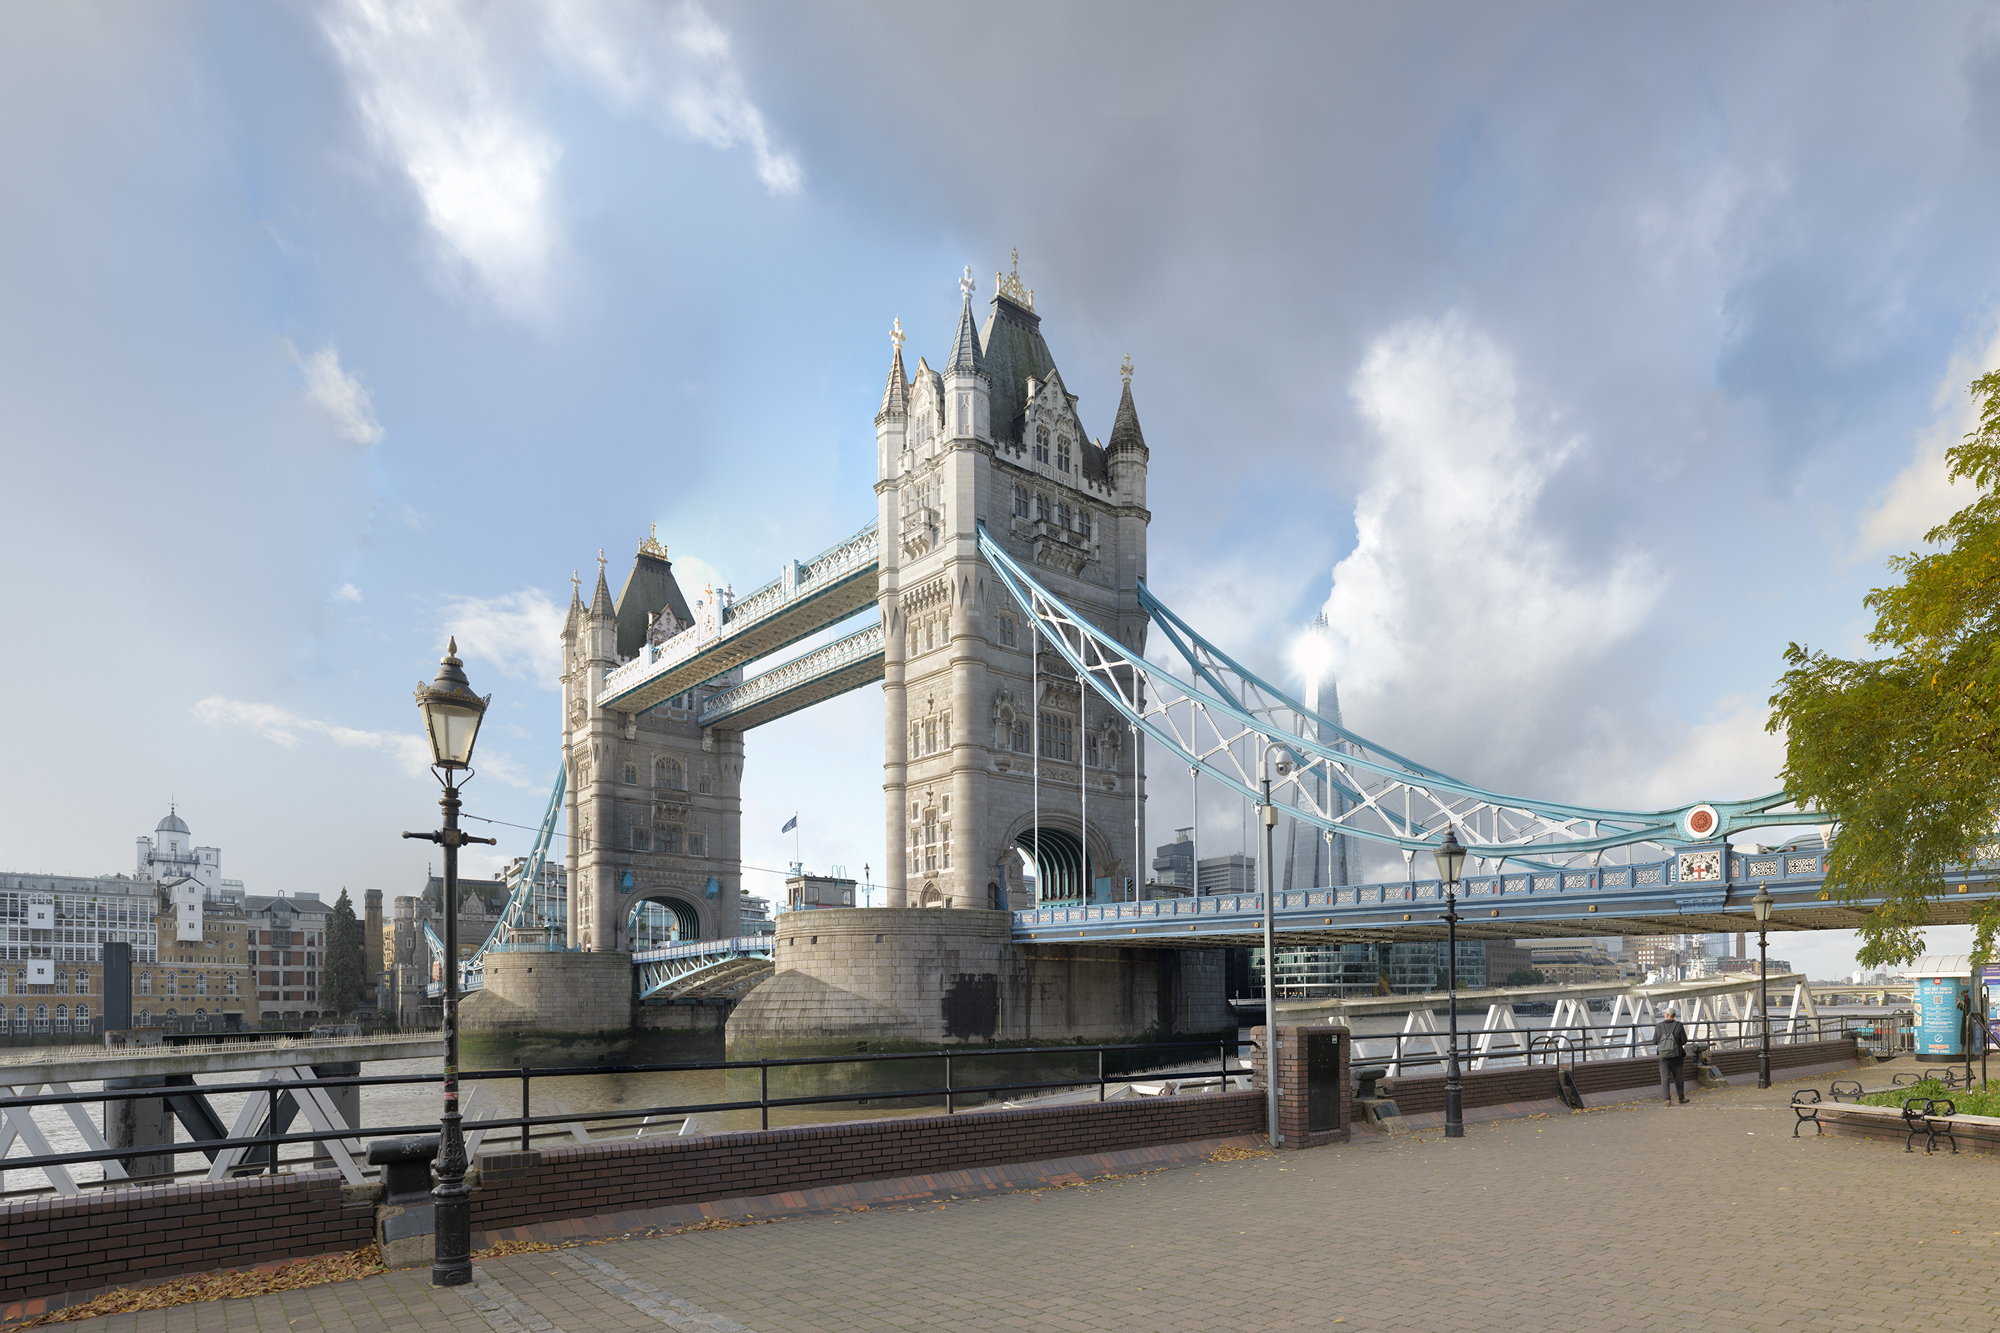 Tower Bridge, London – Initial Visual. The Start. Not The End.